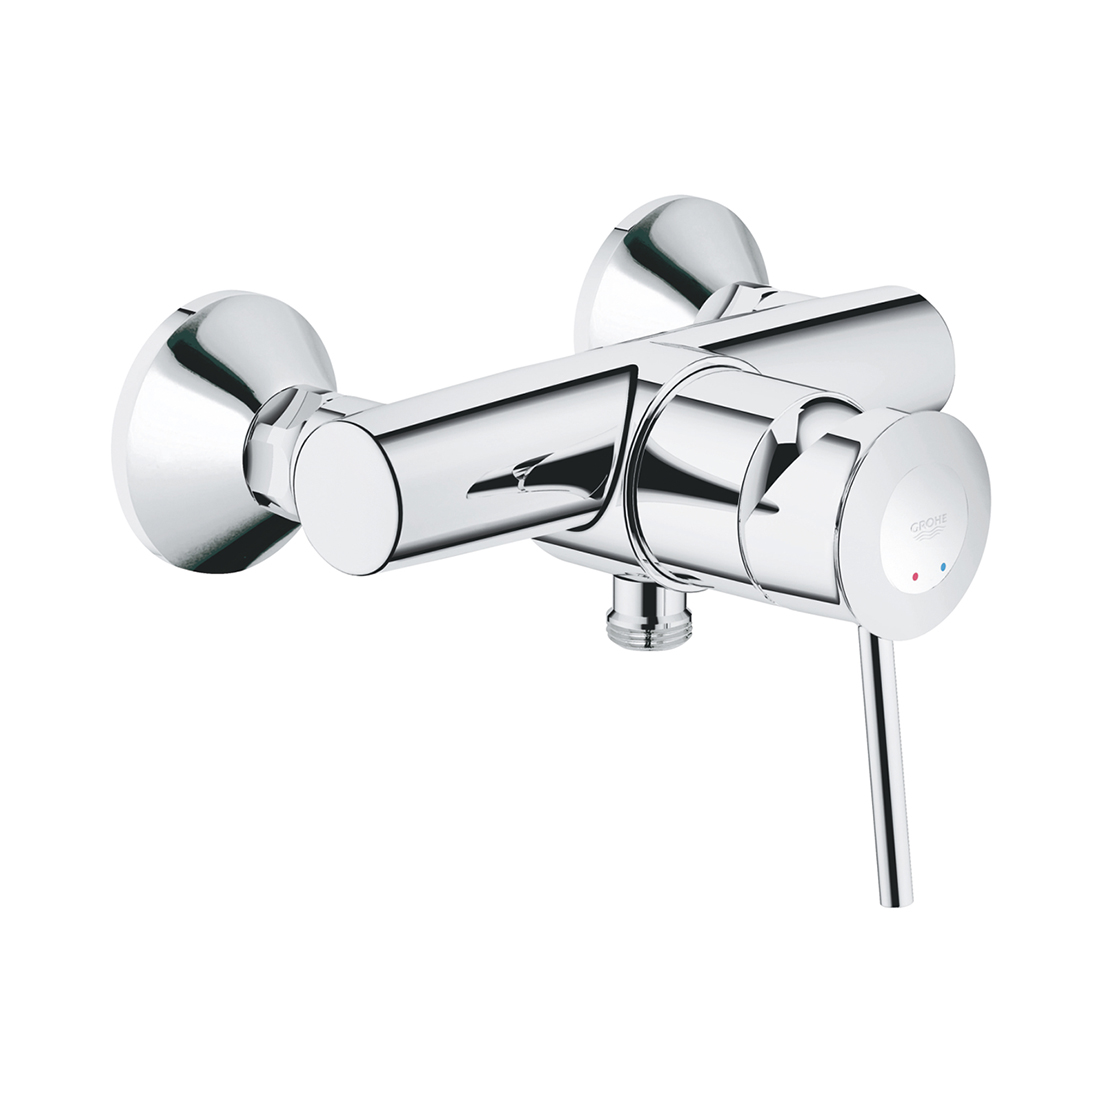 Grohe 29048000 Bauclassic Single-Lever Shower Mixer 1/2